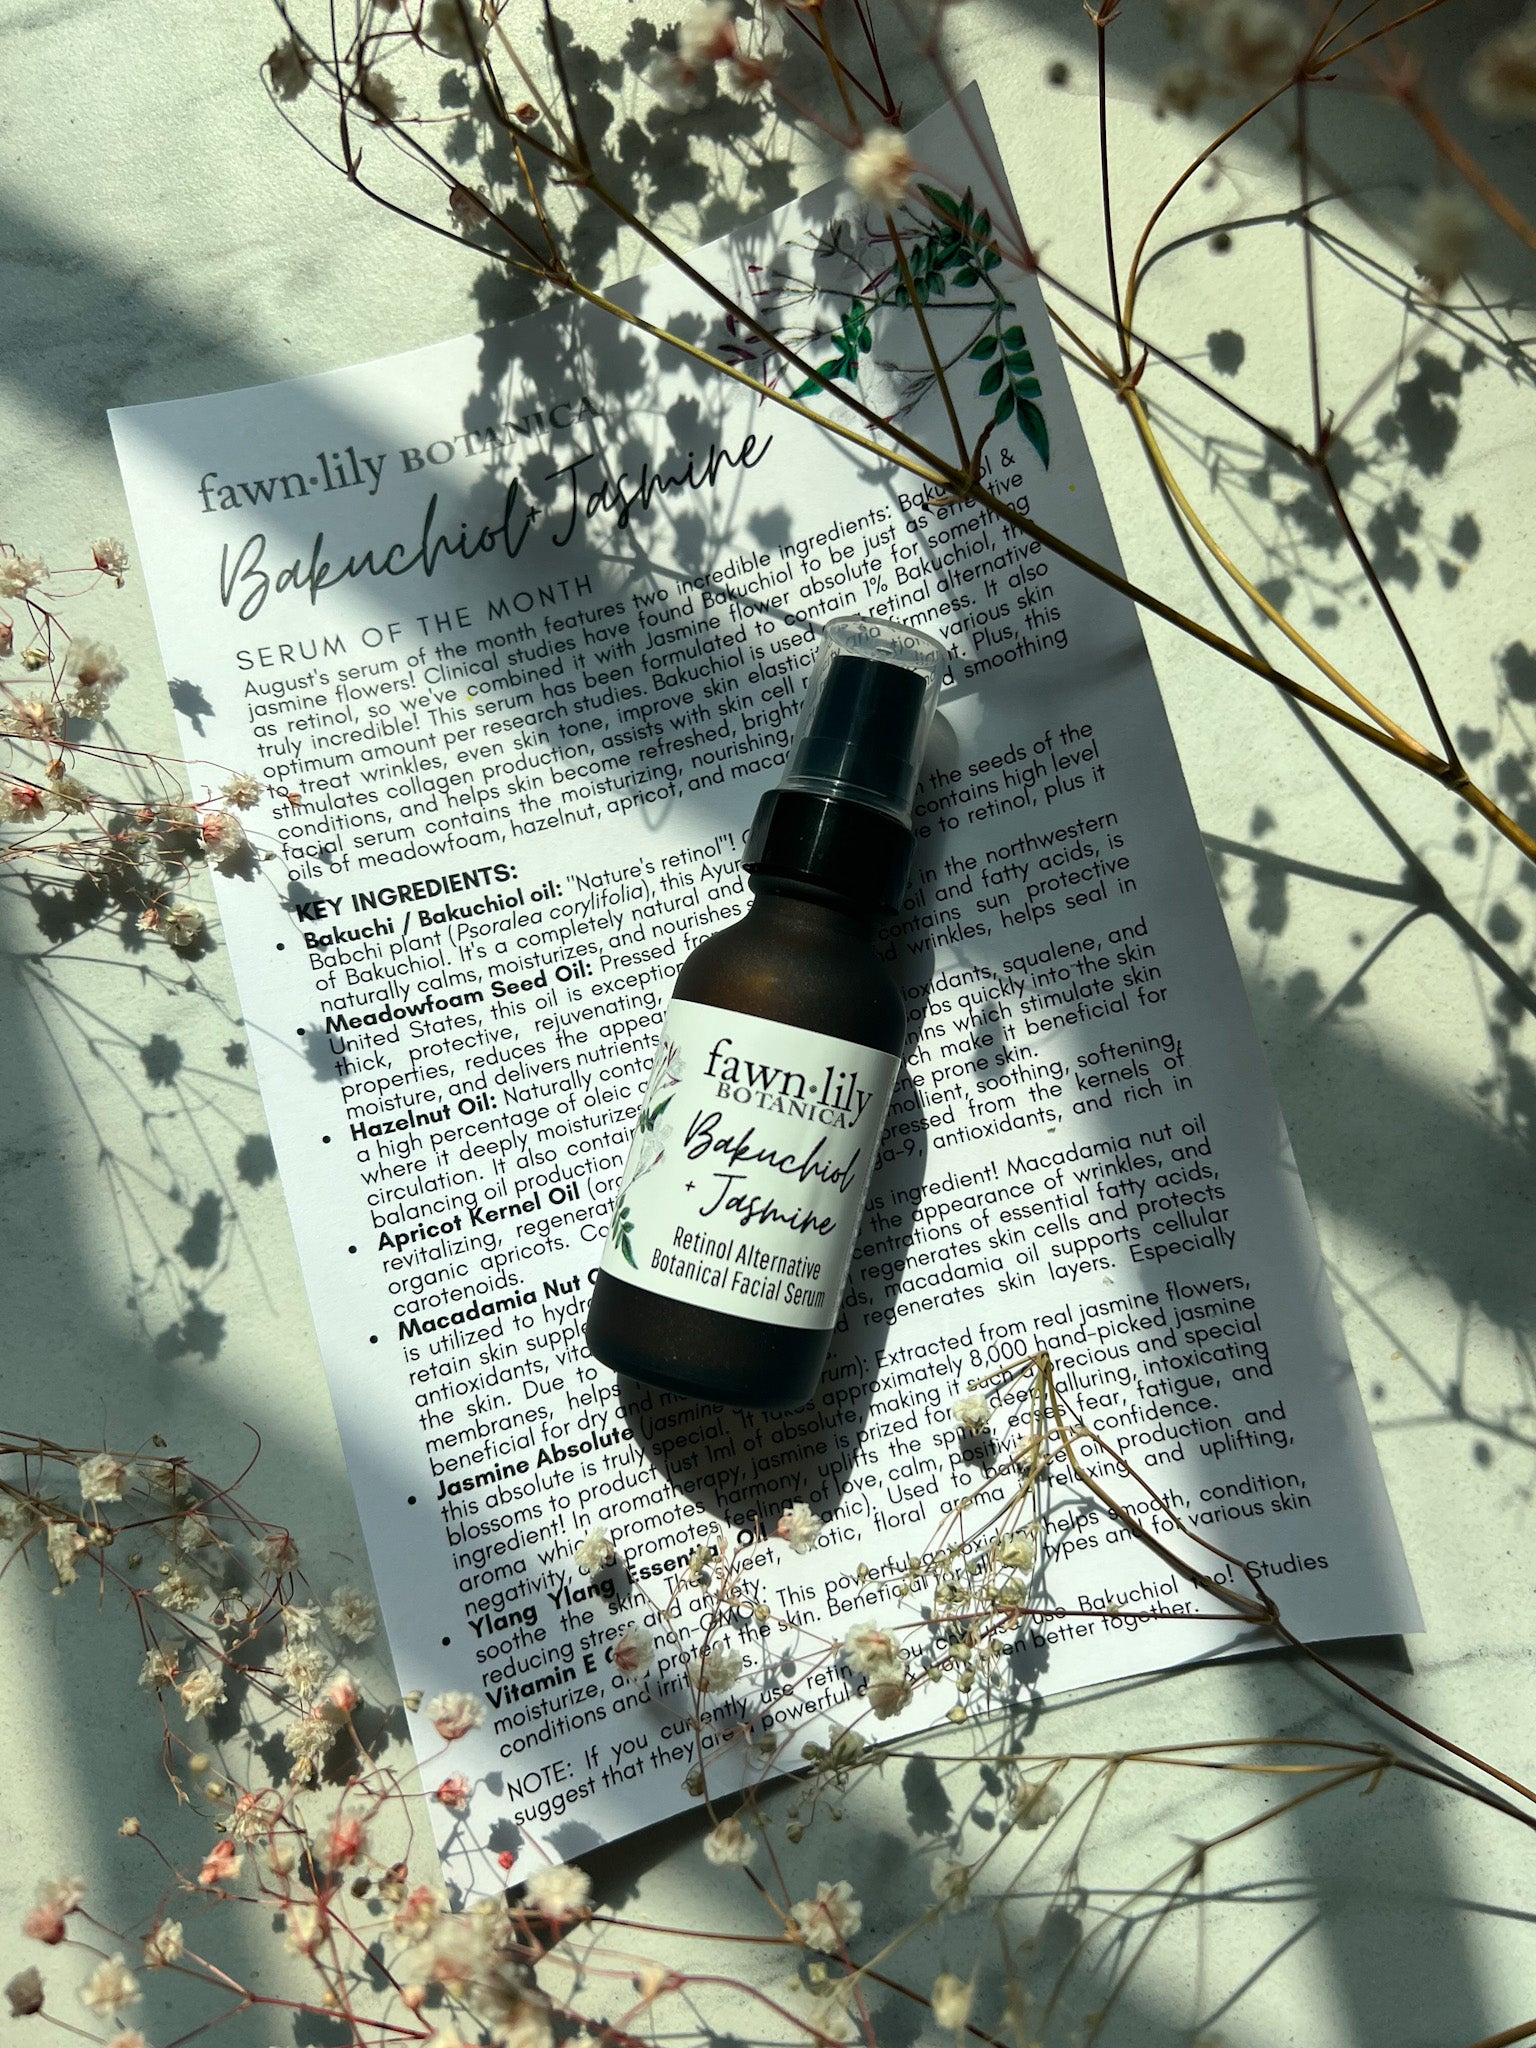 Fawn Lily Botanica offers the best plant-based facial serums including our seasonal serum of the month club designed to help keep your skin balanced and healthy throughout the year